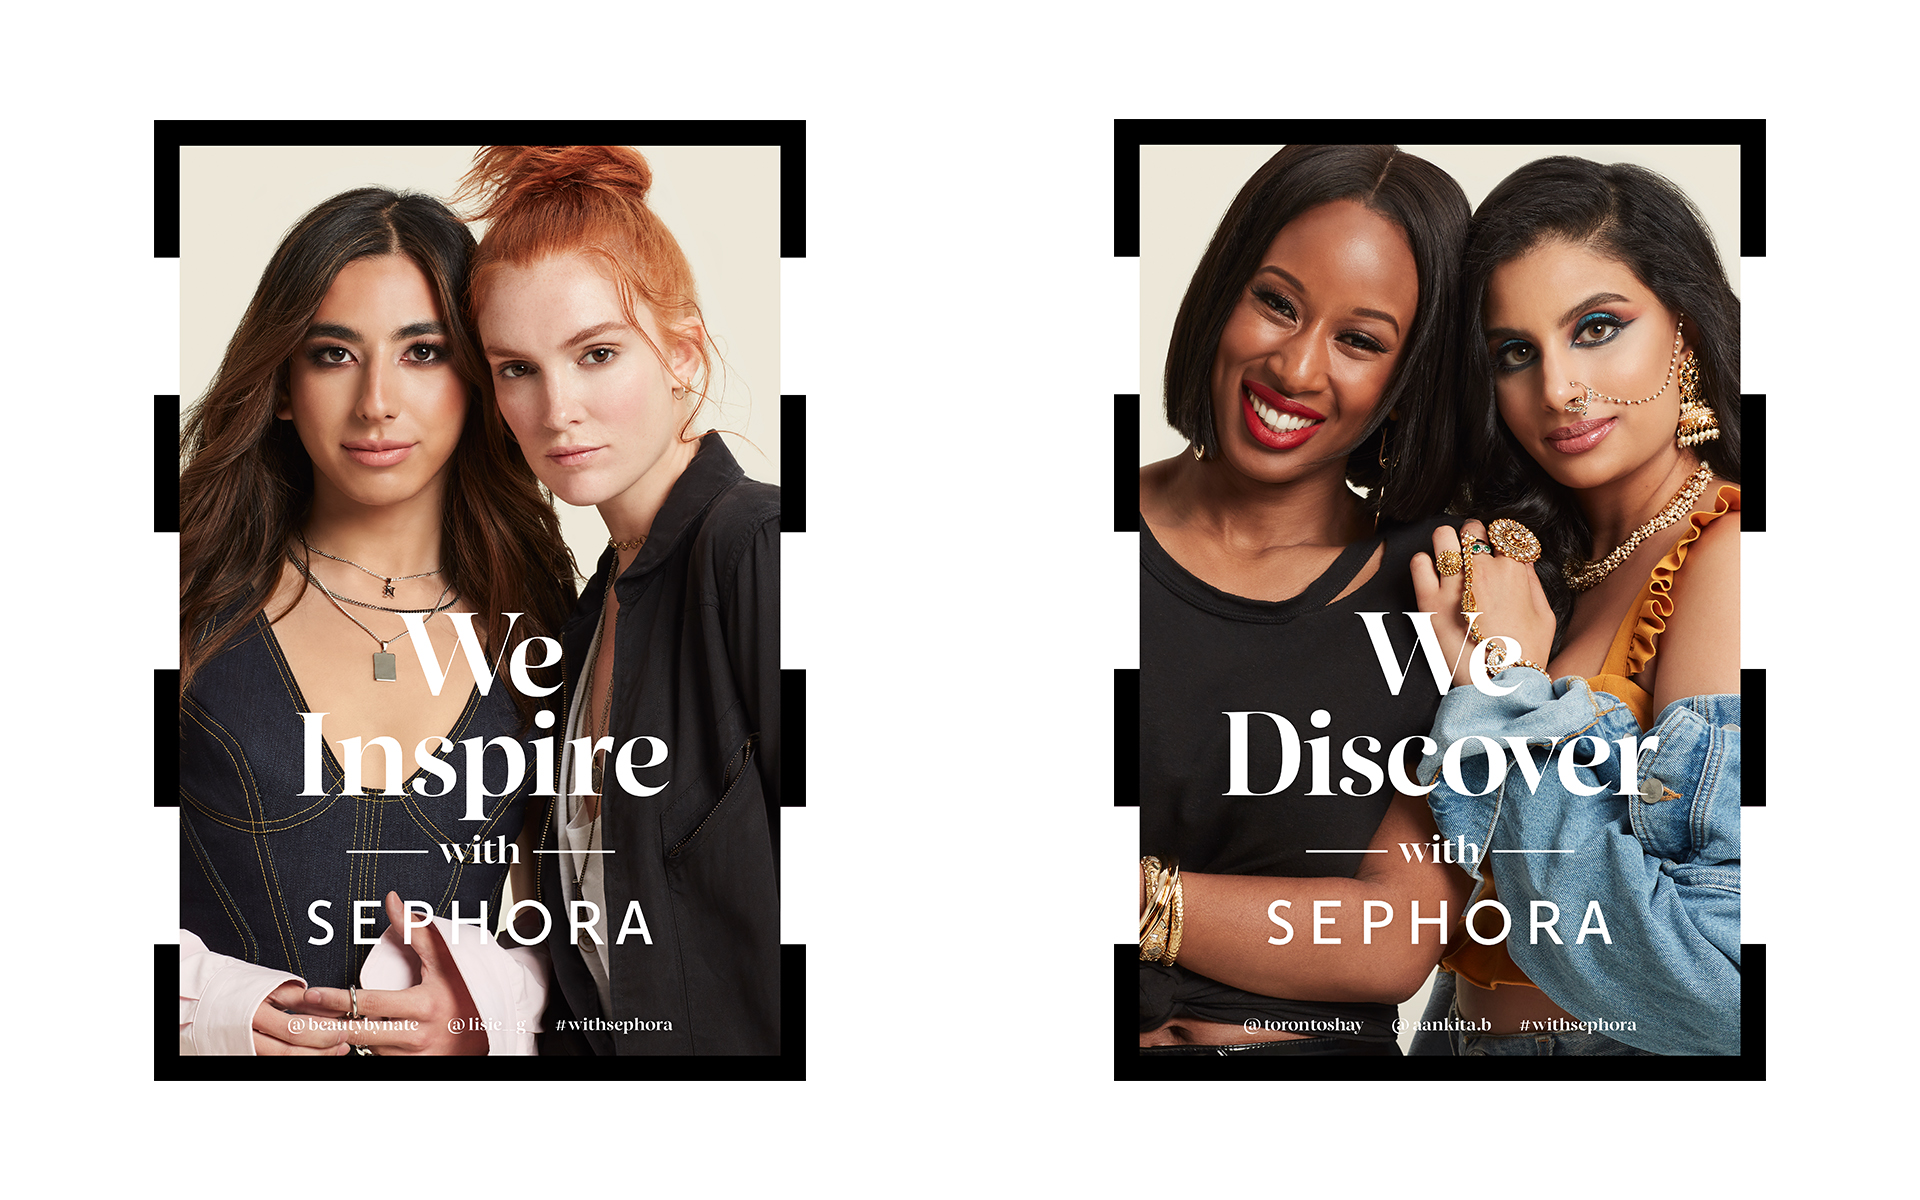 Beautiful Competition: Sephora Slowly Takes Over – The Beauty